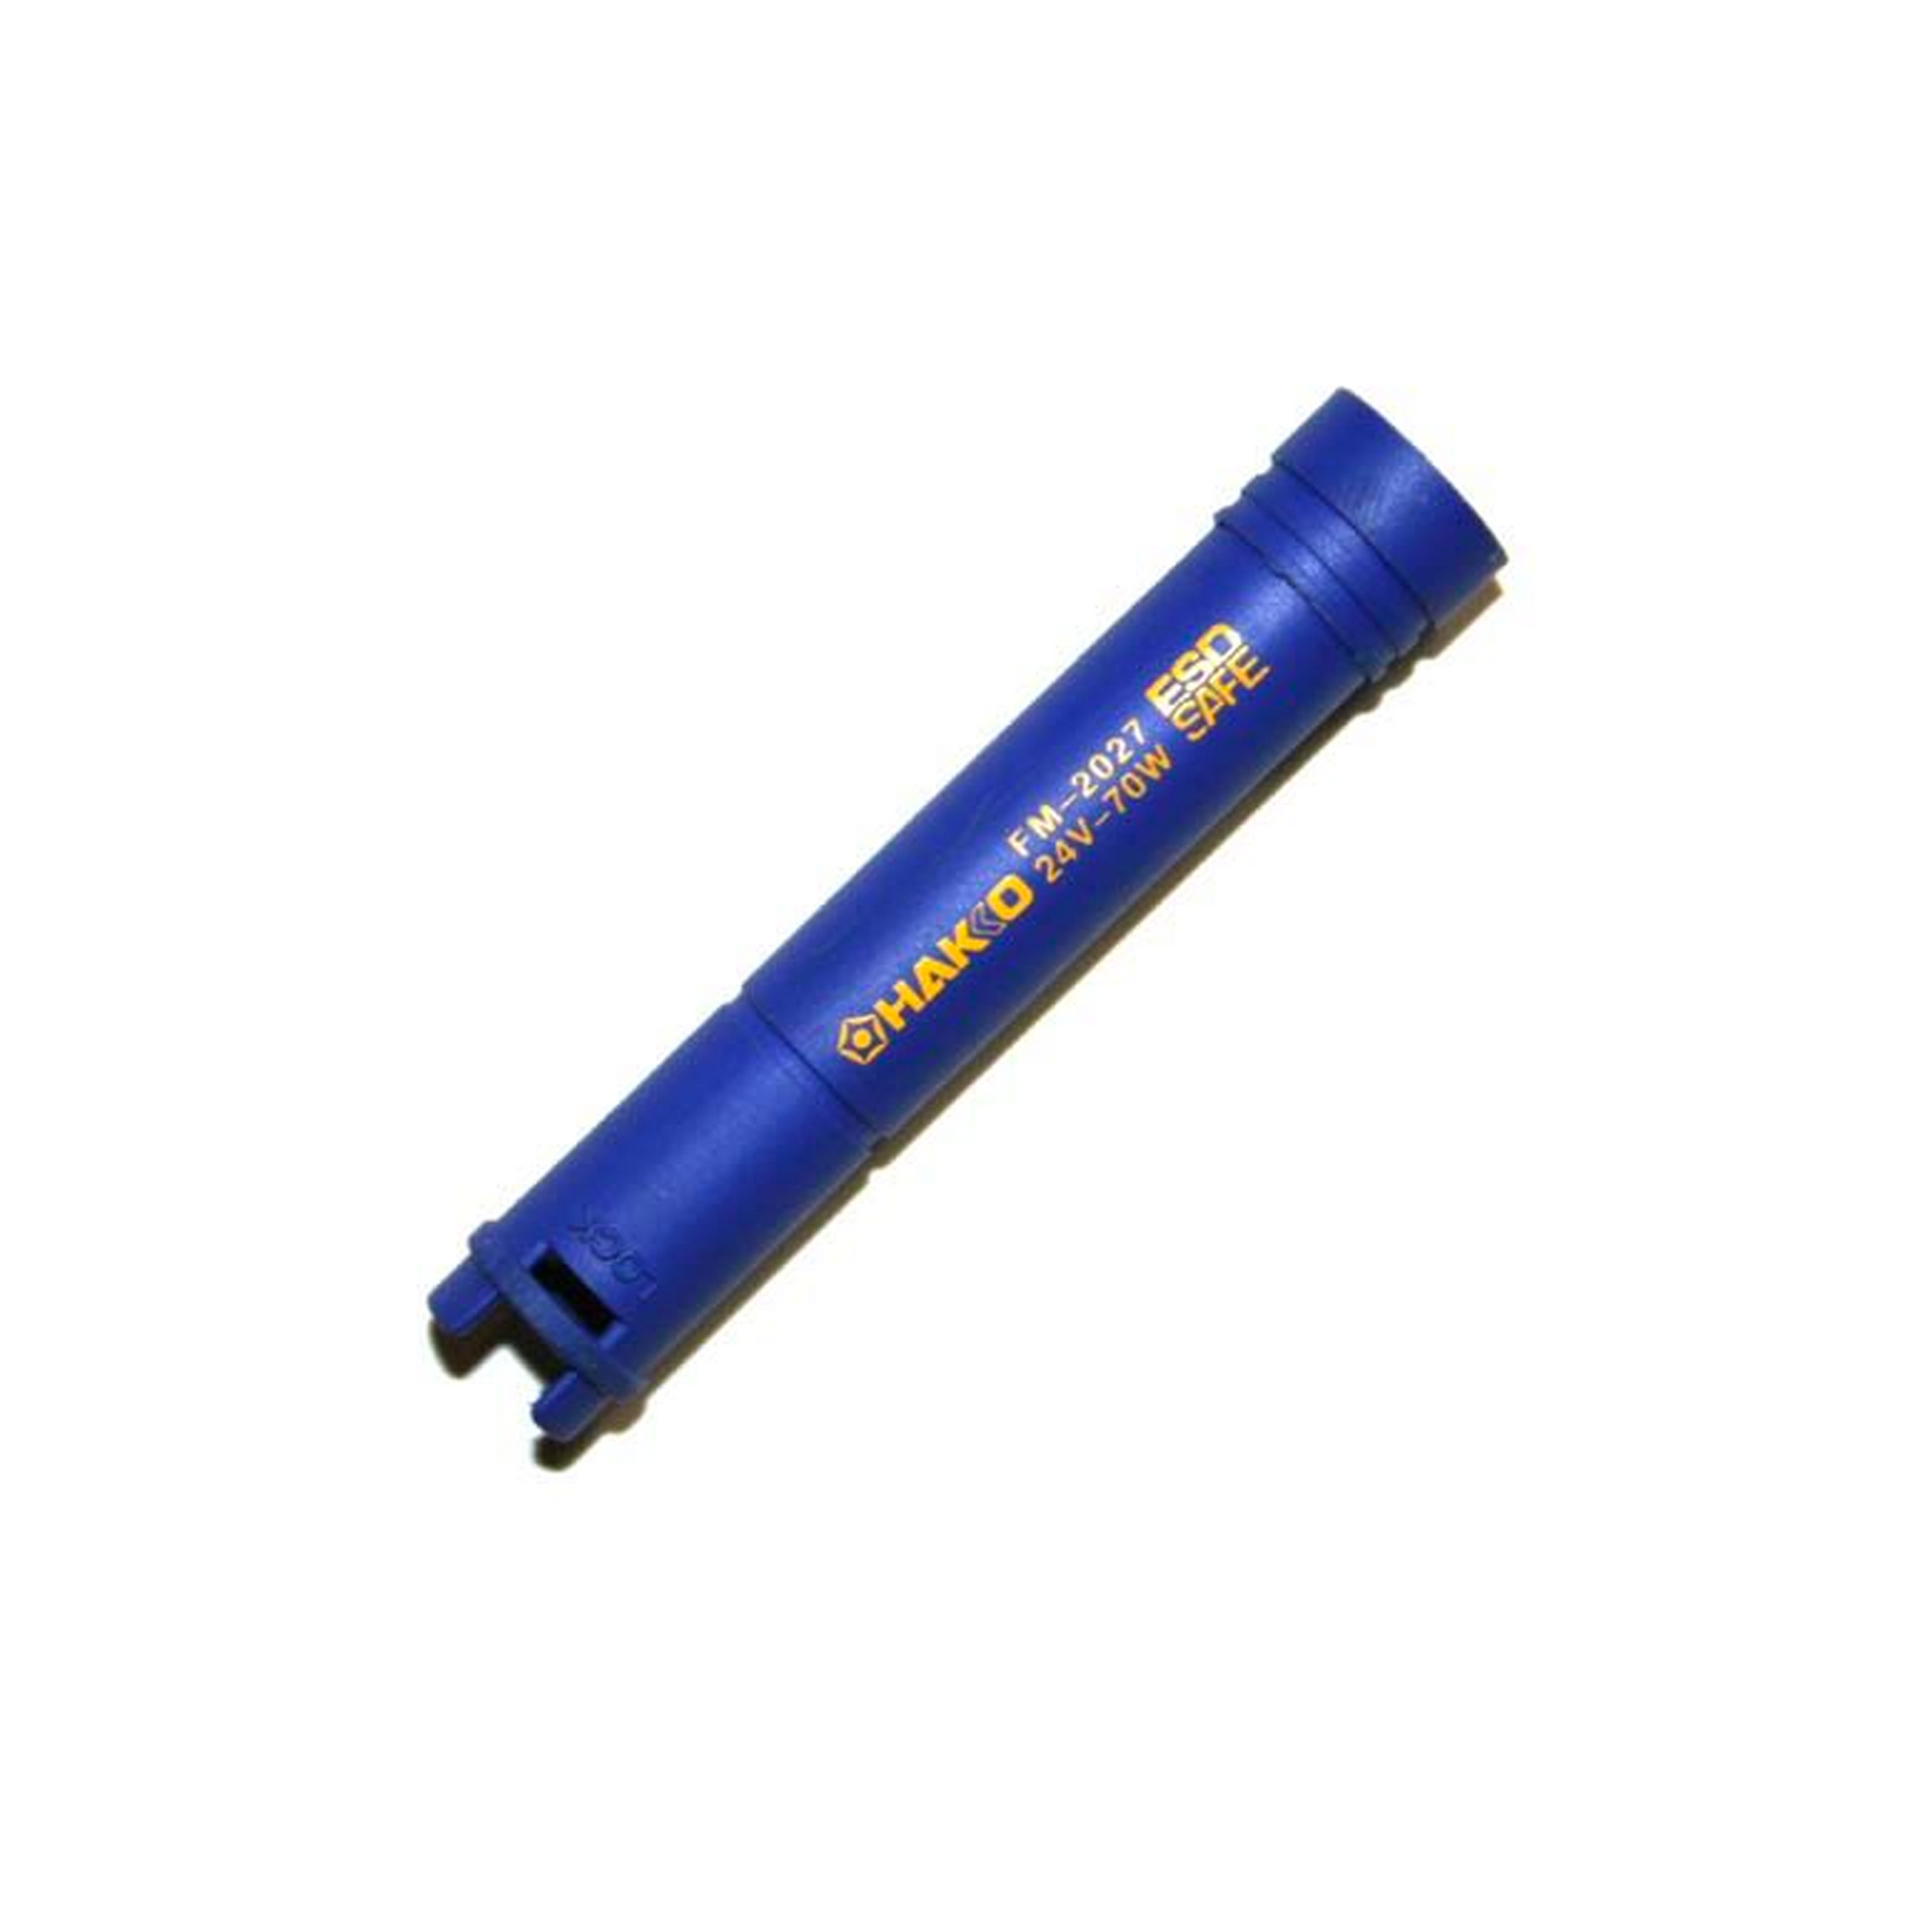 Hakko Products_ B3215 Locking Connector Cover_ Soldering Accessories_ Hakko Products